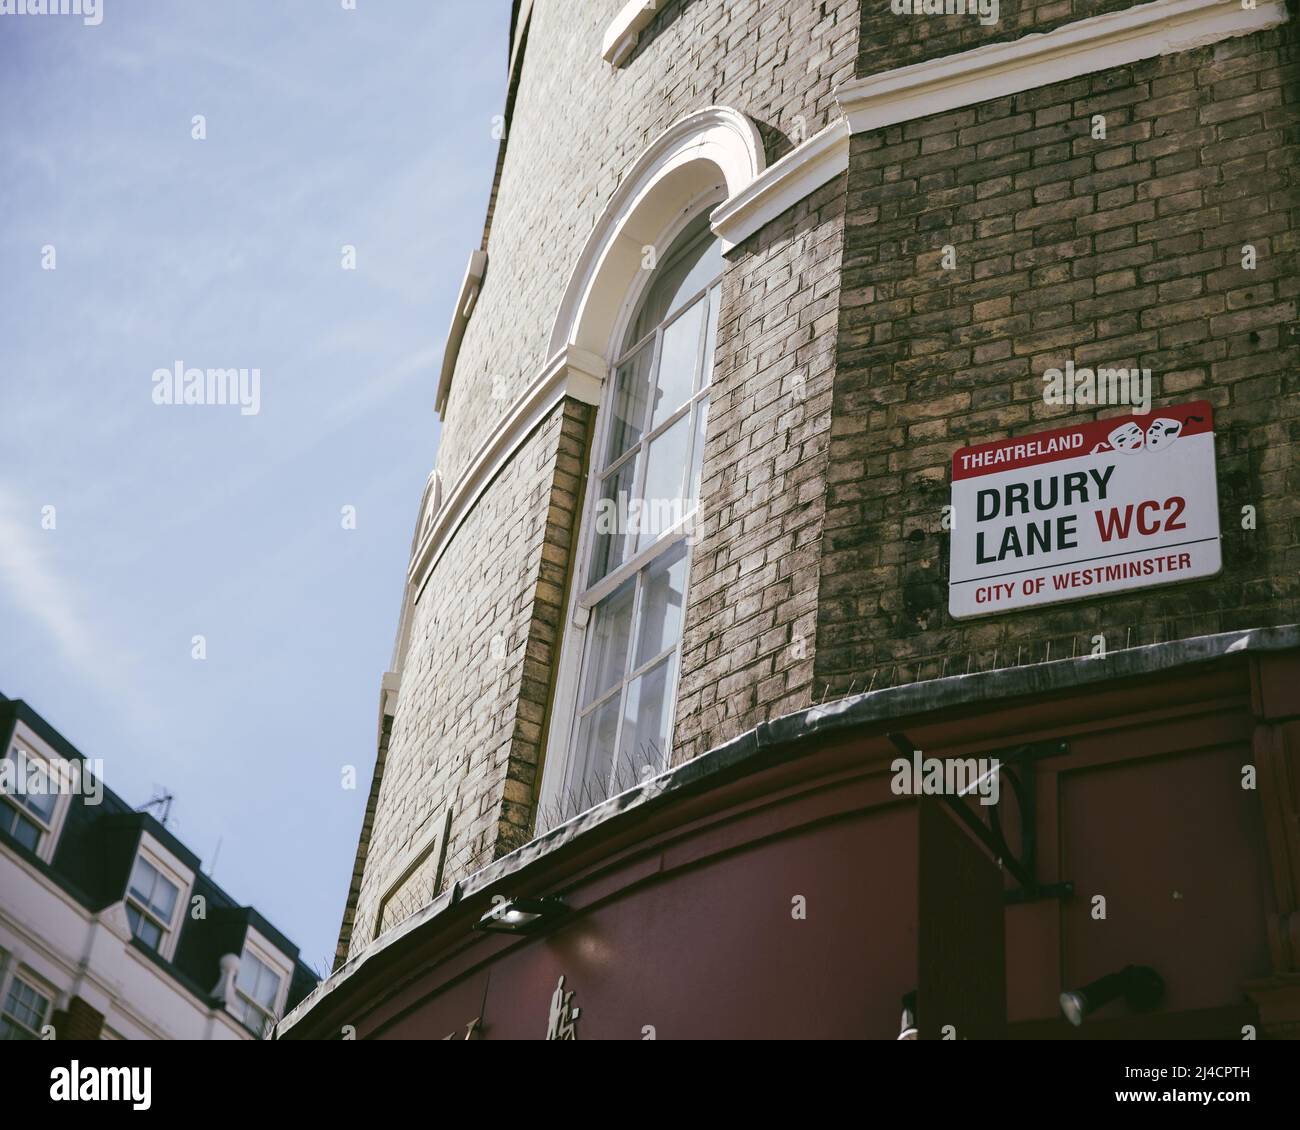 Greater London, London, UK - April 12, 2016: An East London building, against a clear blue sky, shows the Drury Lane street sign. Stock Photo